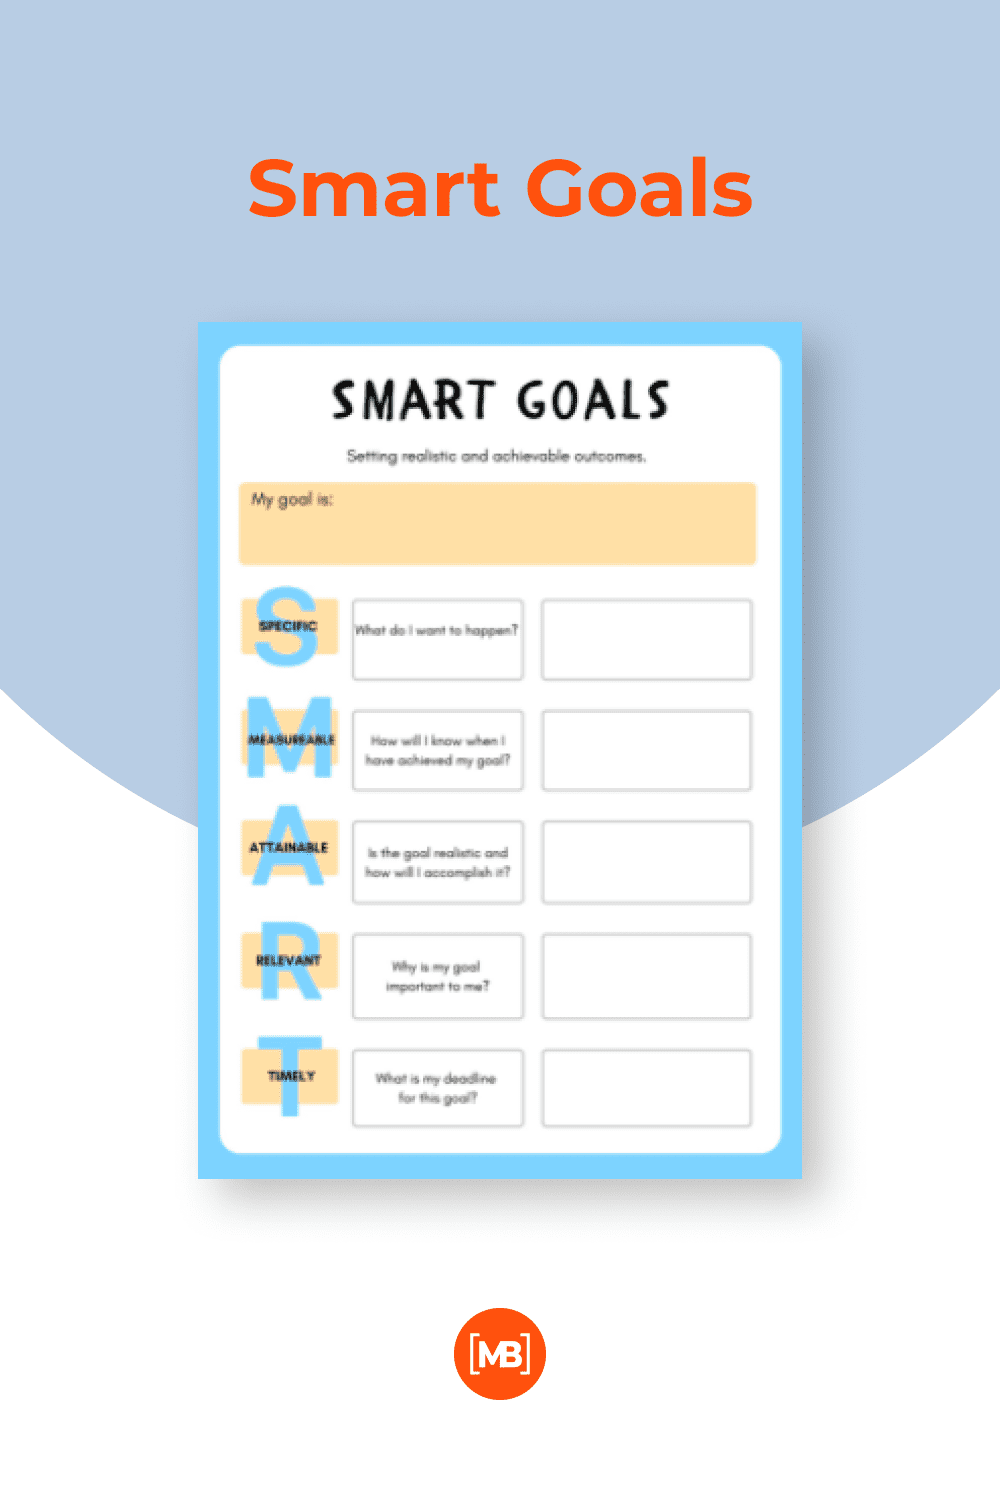 A clear and understandable table for setting goals according to the SMART system.